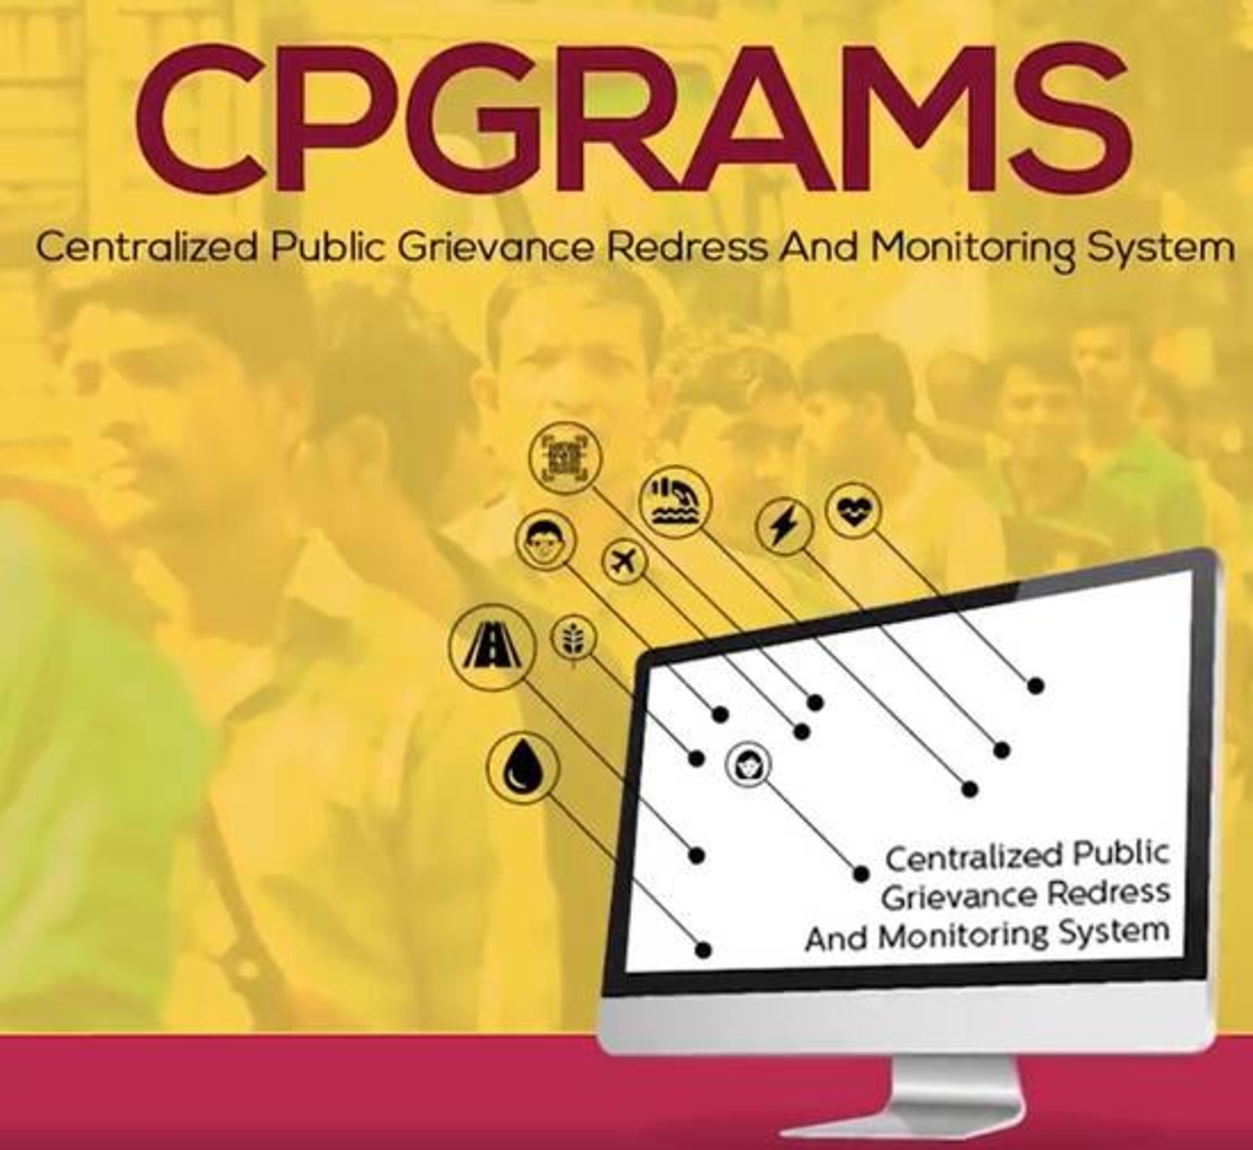 Outstanding grievance more than 30 days under CPGRAMS portals: CGDA